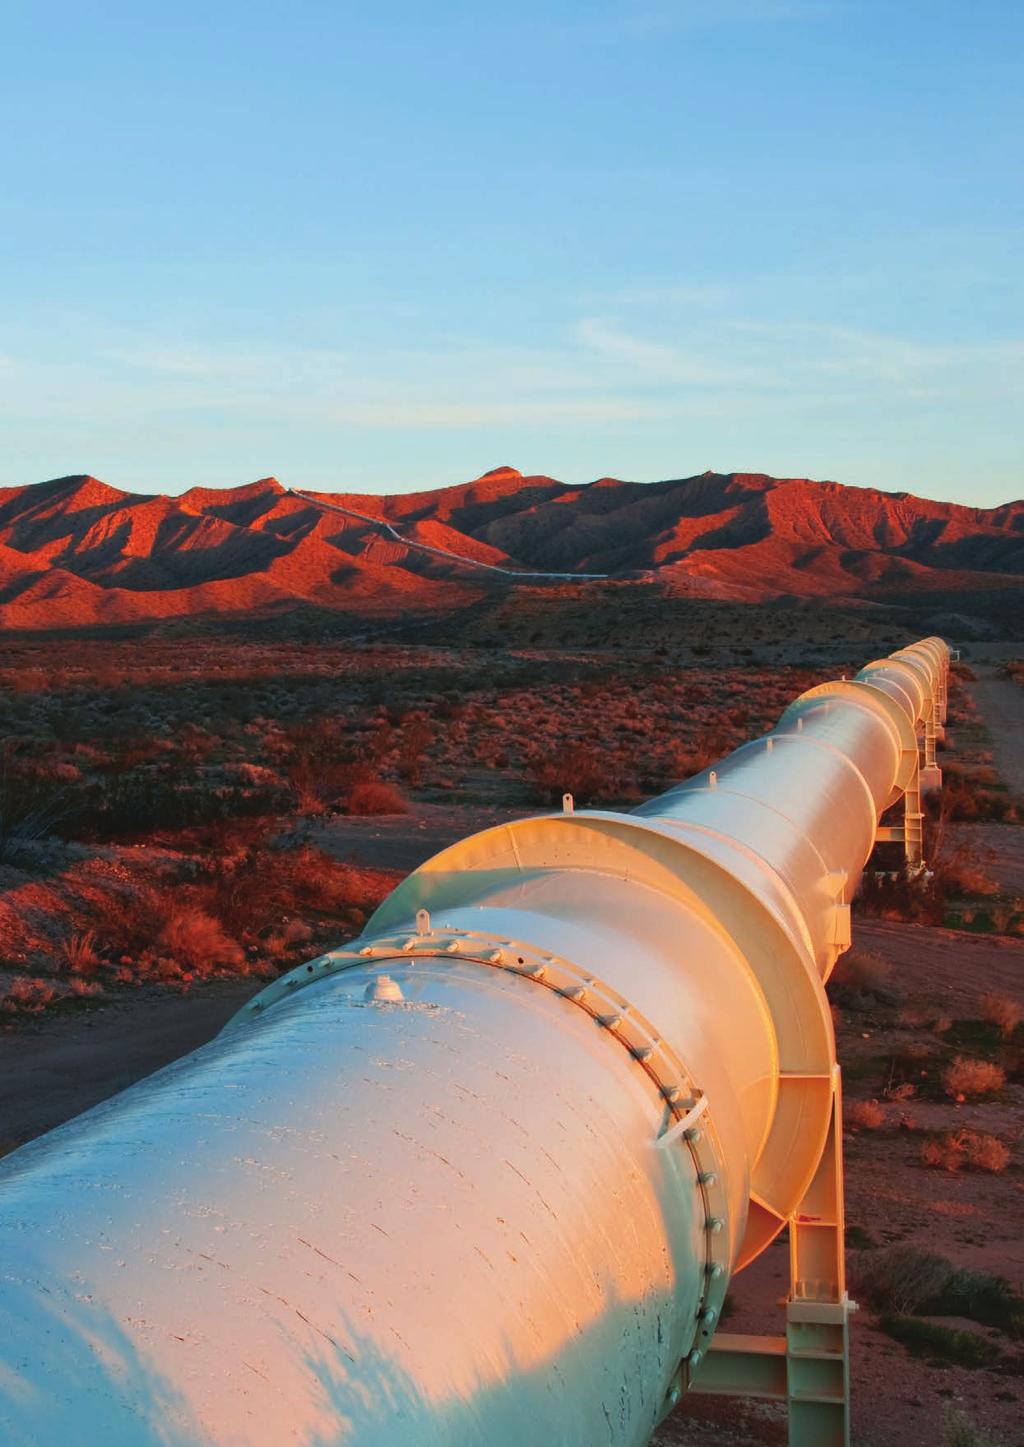 Natural Gas Pipeline Engineering From pipeline design and corrosion assessments to integrity management, our team provides a single-source solution to clients, regardless of the